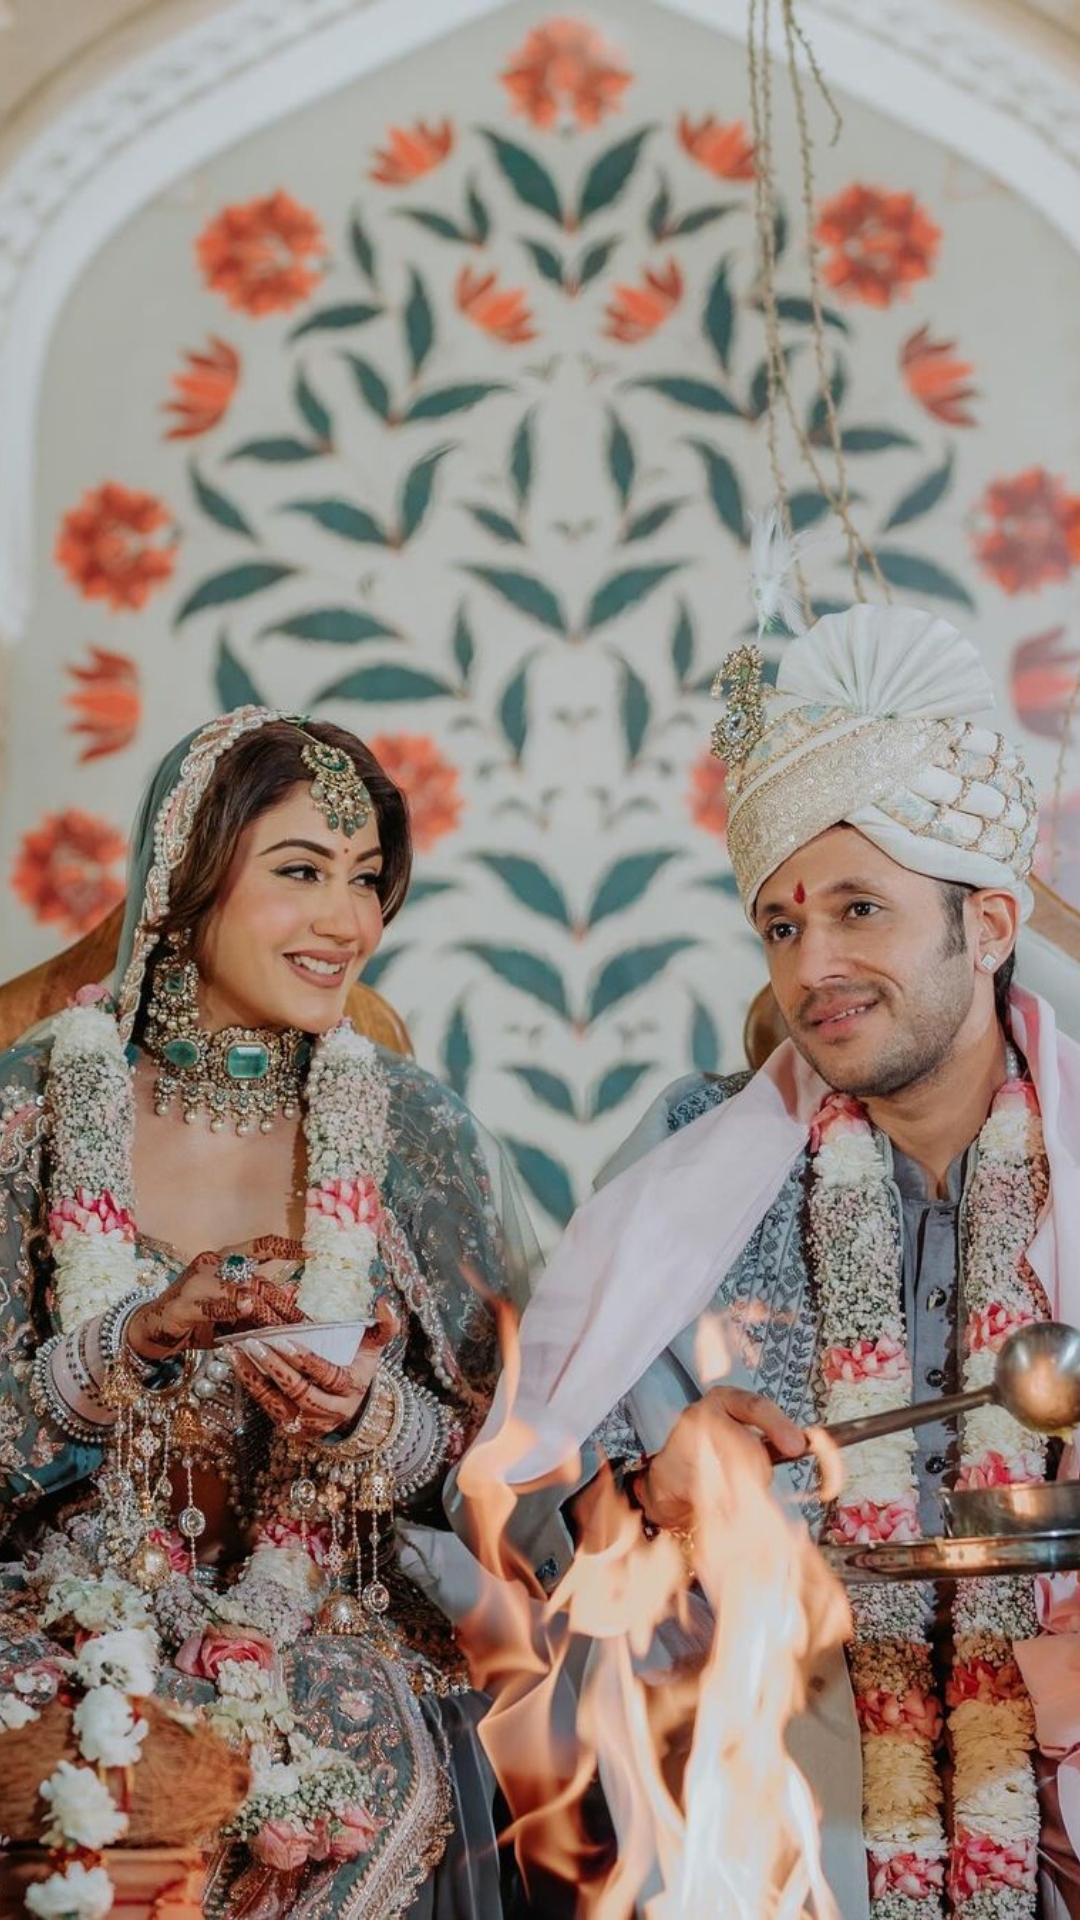 Ishqbaaaz fame actress Surbhi Chandna got married to her boyfriend Karan Sharma on March 2. The wedding pictures of this beautiful couple are becoming increasingly viral on social media. Surbhi is looking very beautiful and happy in the pictures viral on social media.